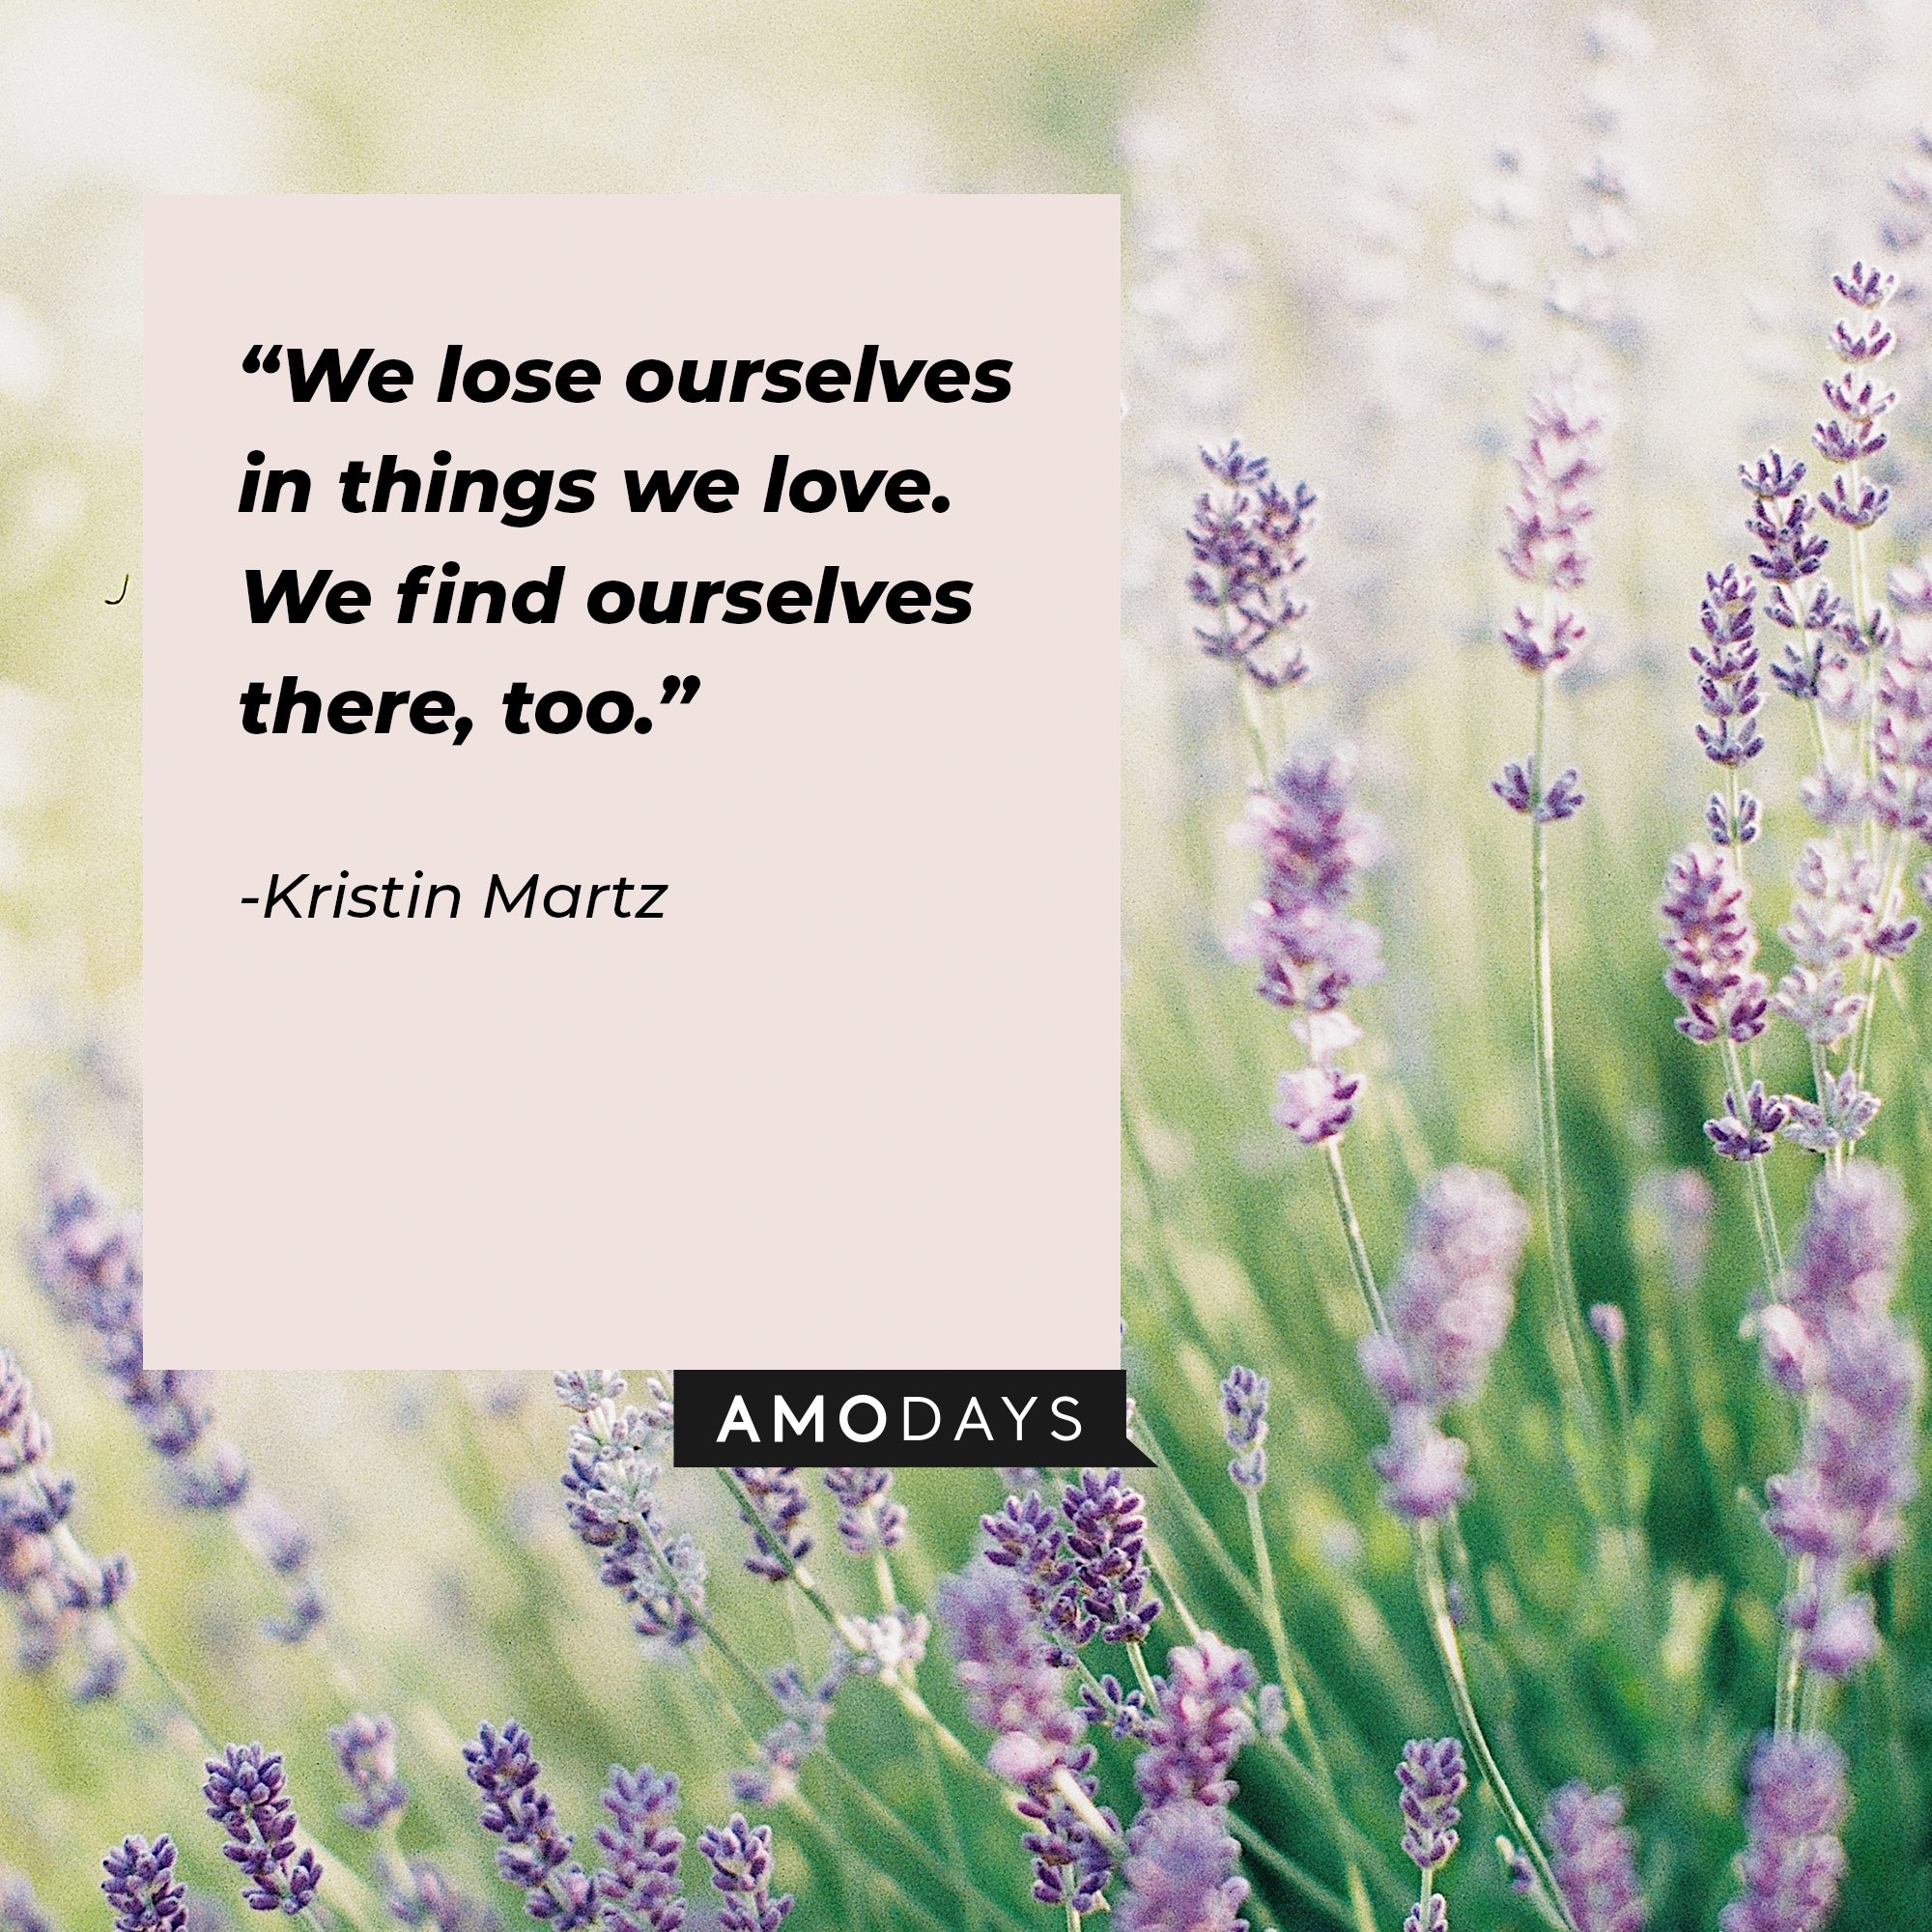 “We lose ourselves in things we love. We find ourselves there, too.”  | Image: AmoDays